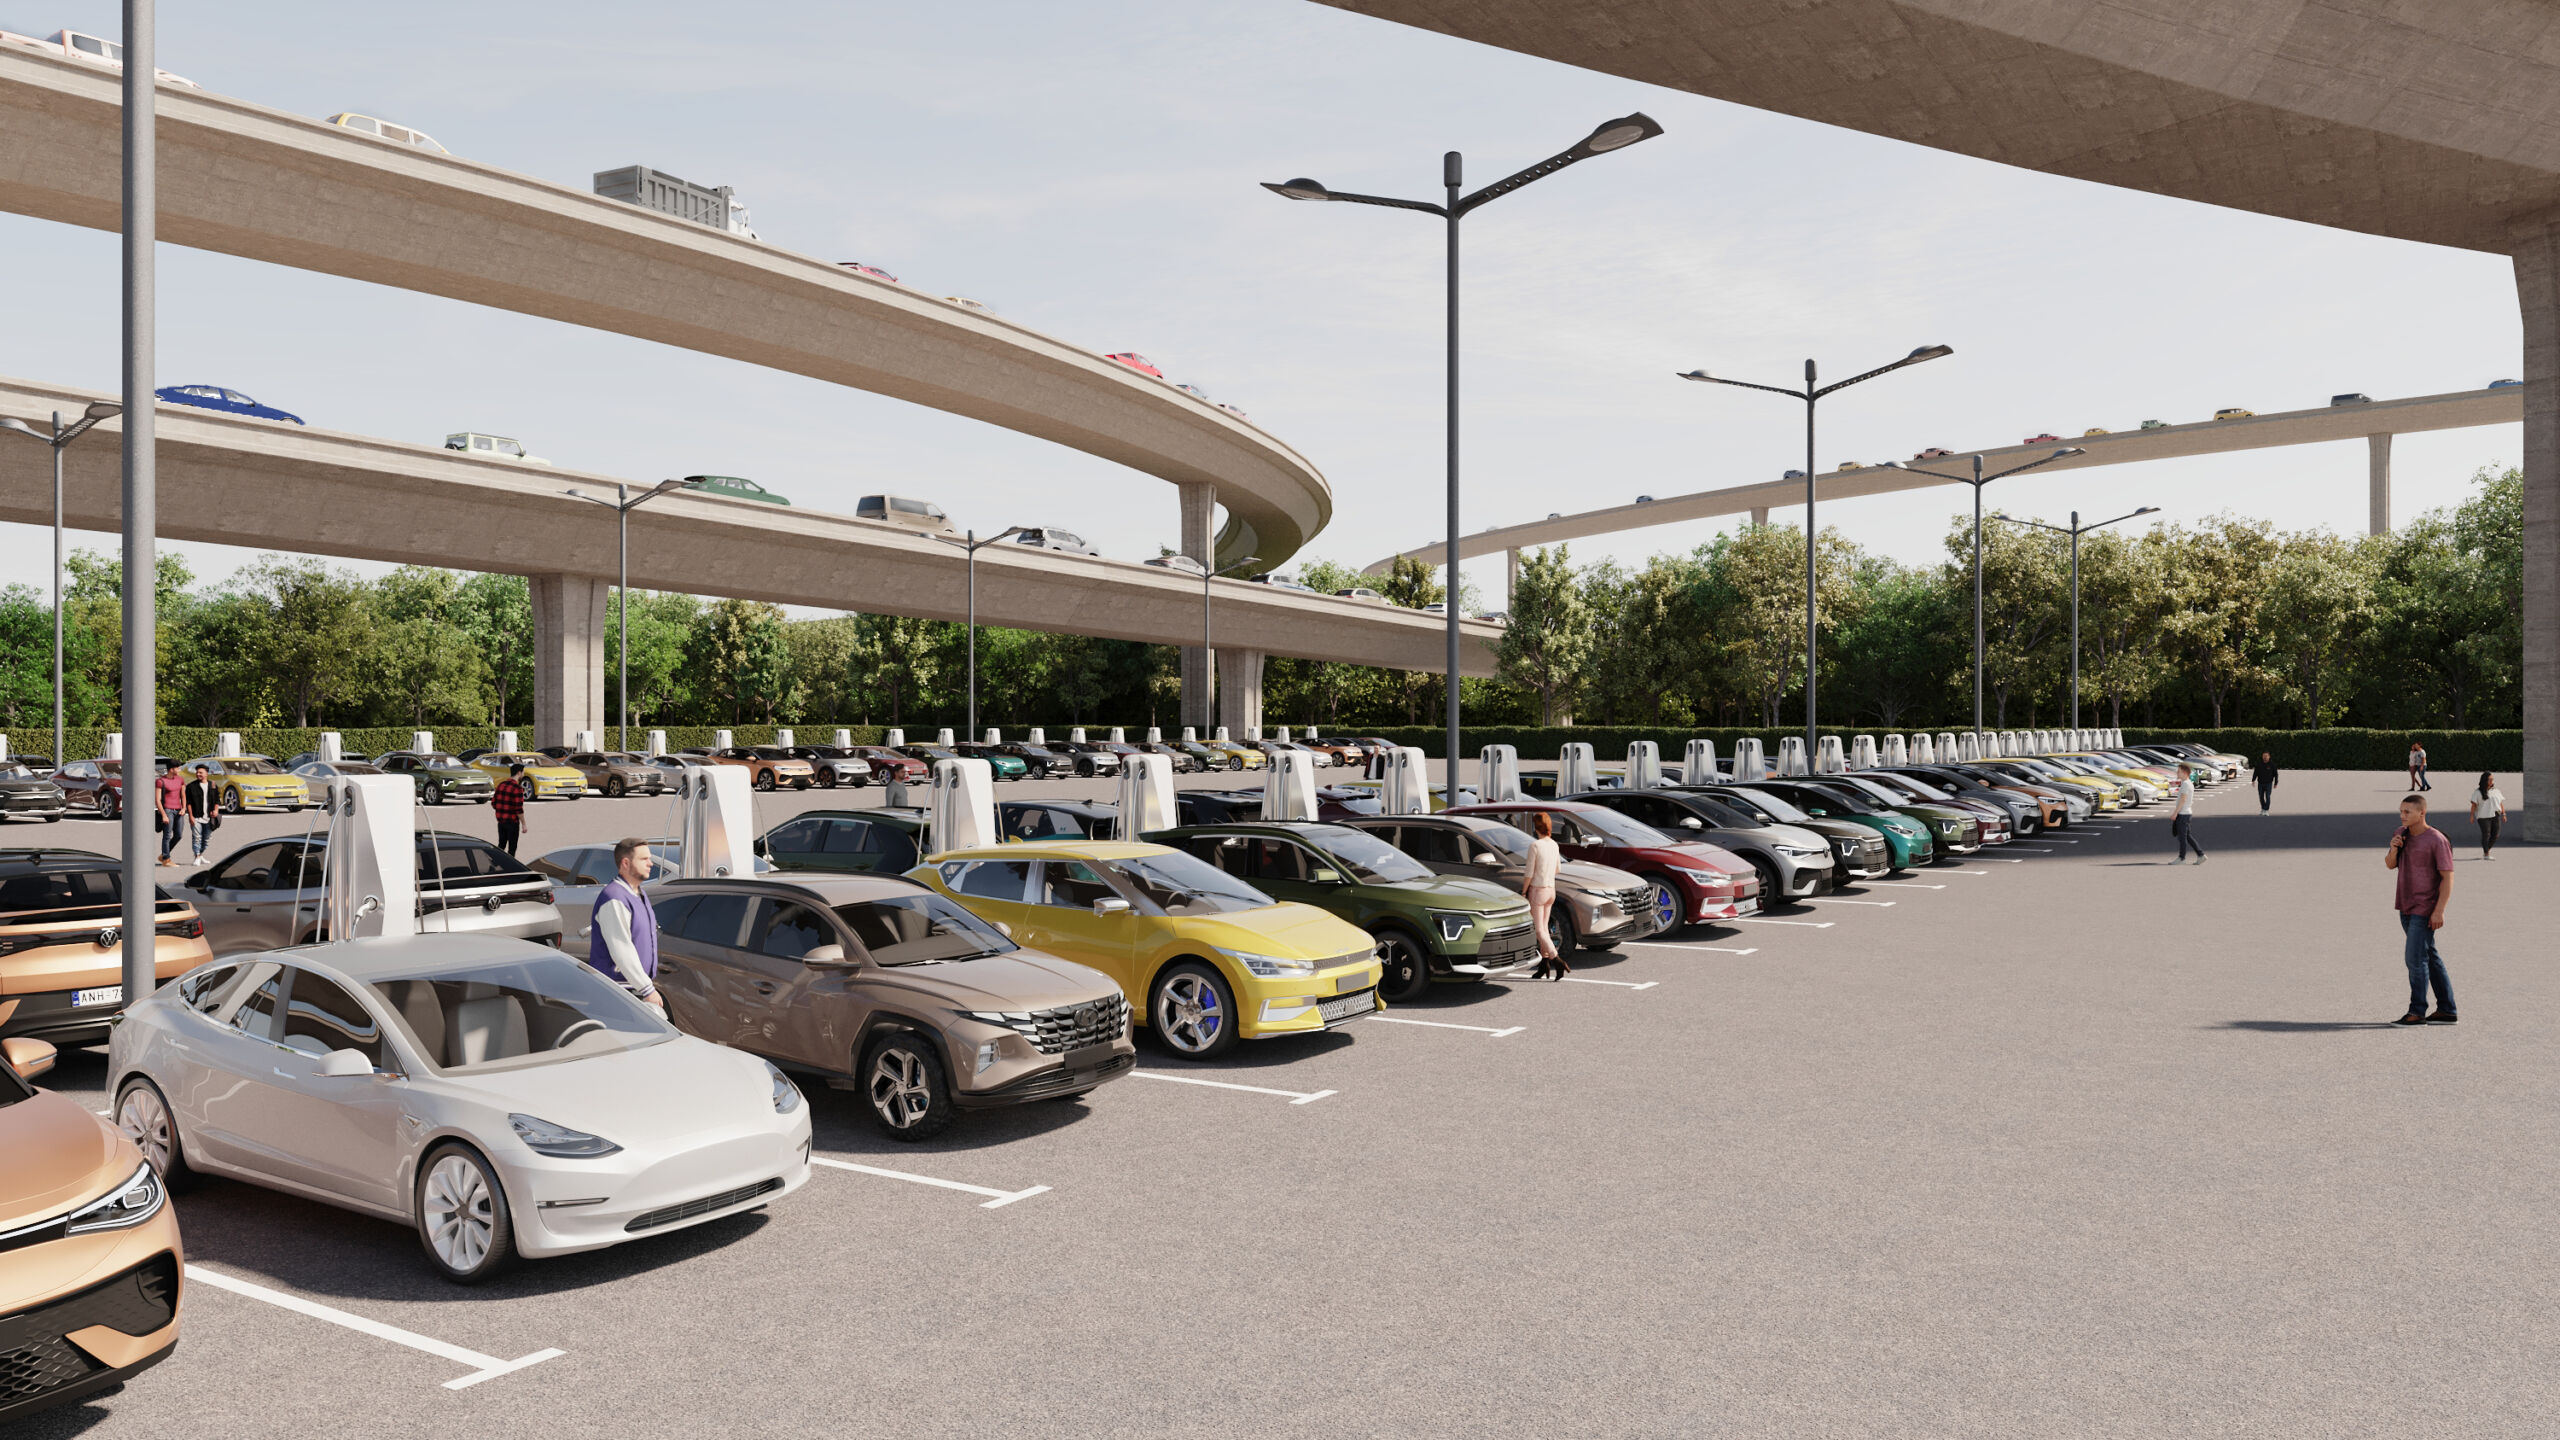 Final EV Charging Park with Ramps and Cars 4-21-23